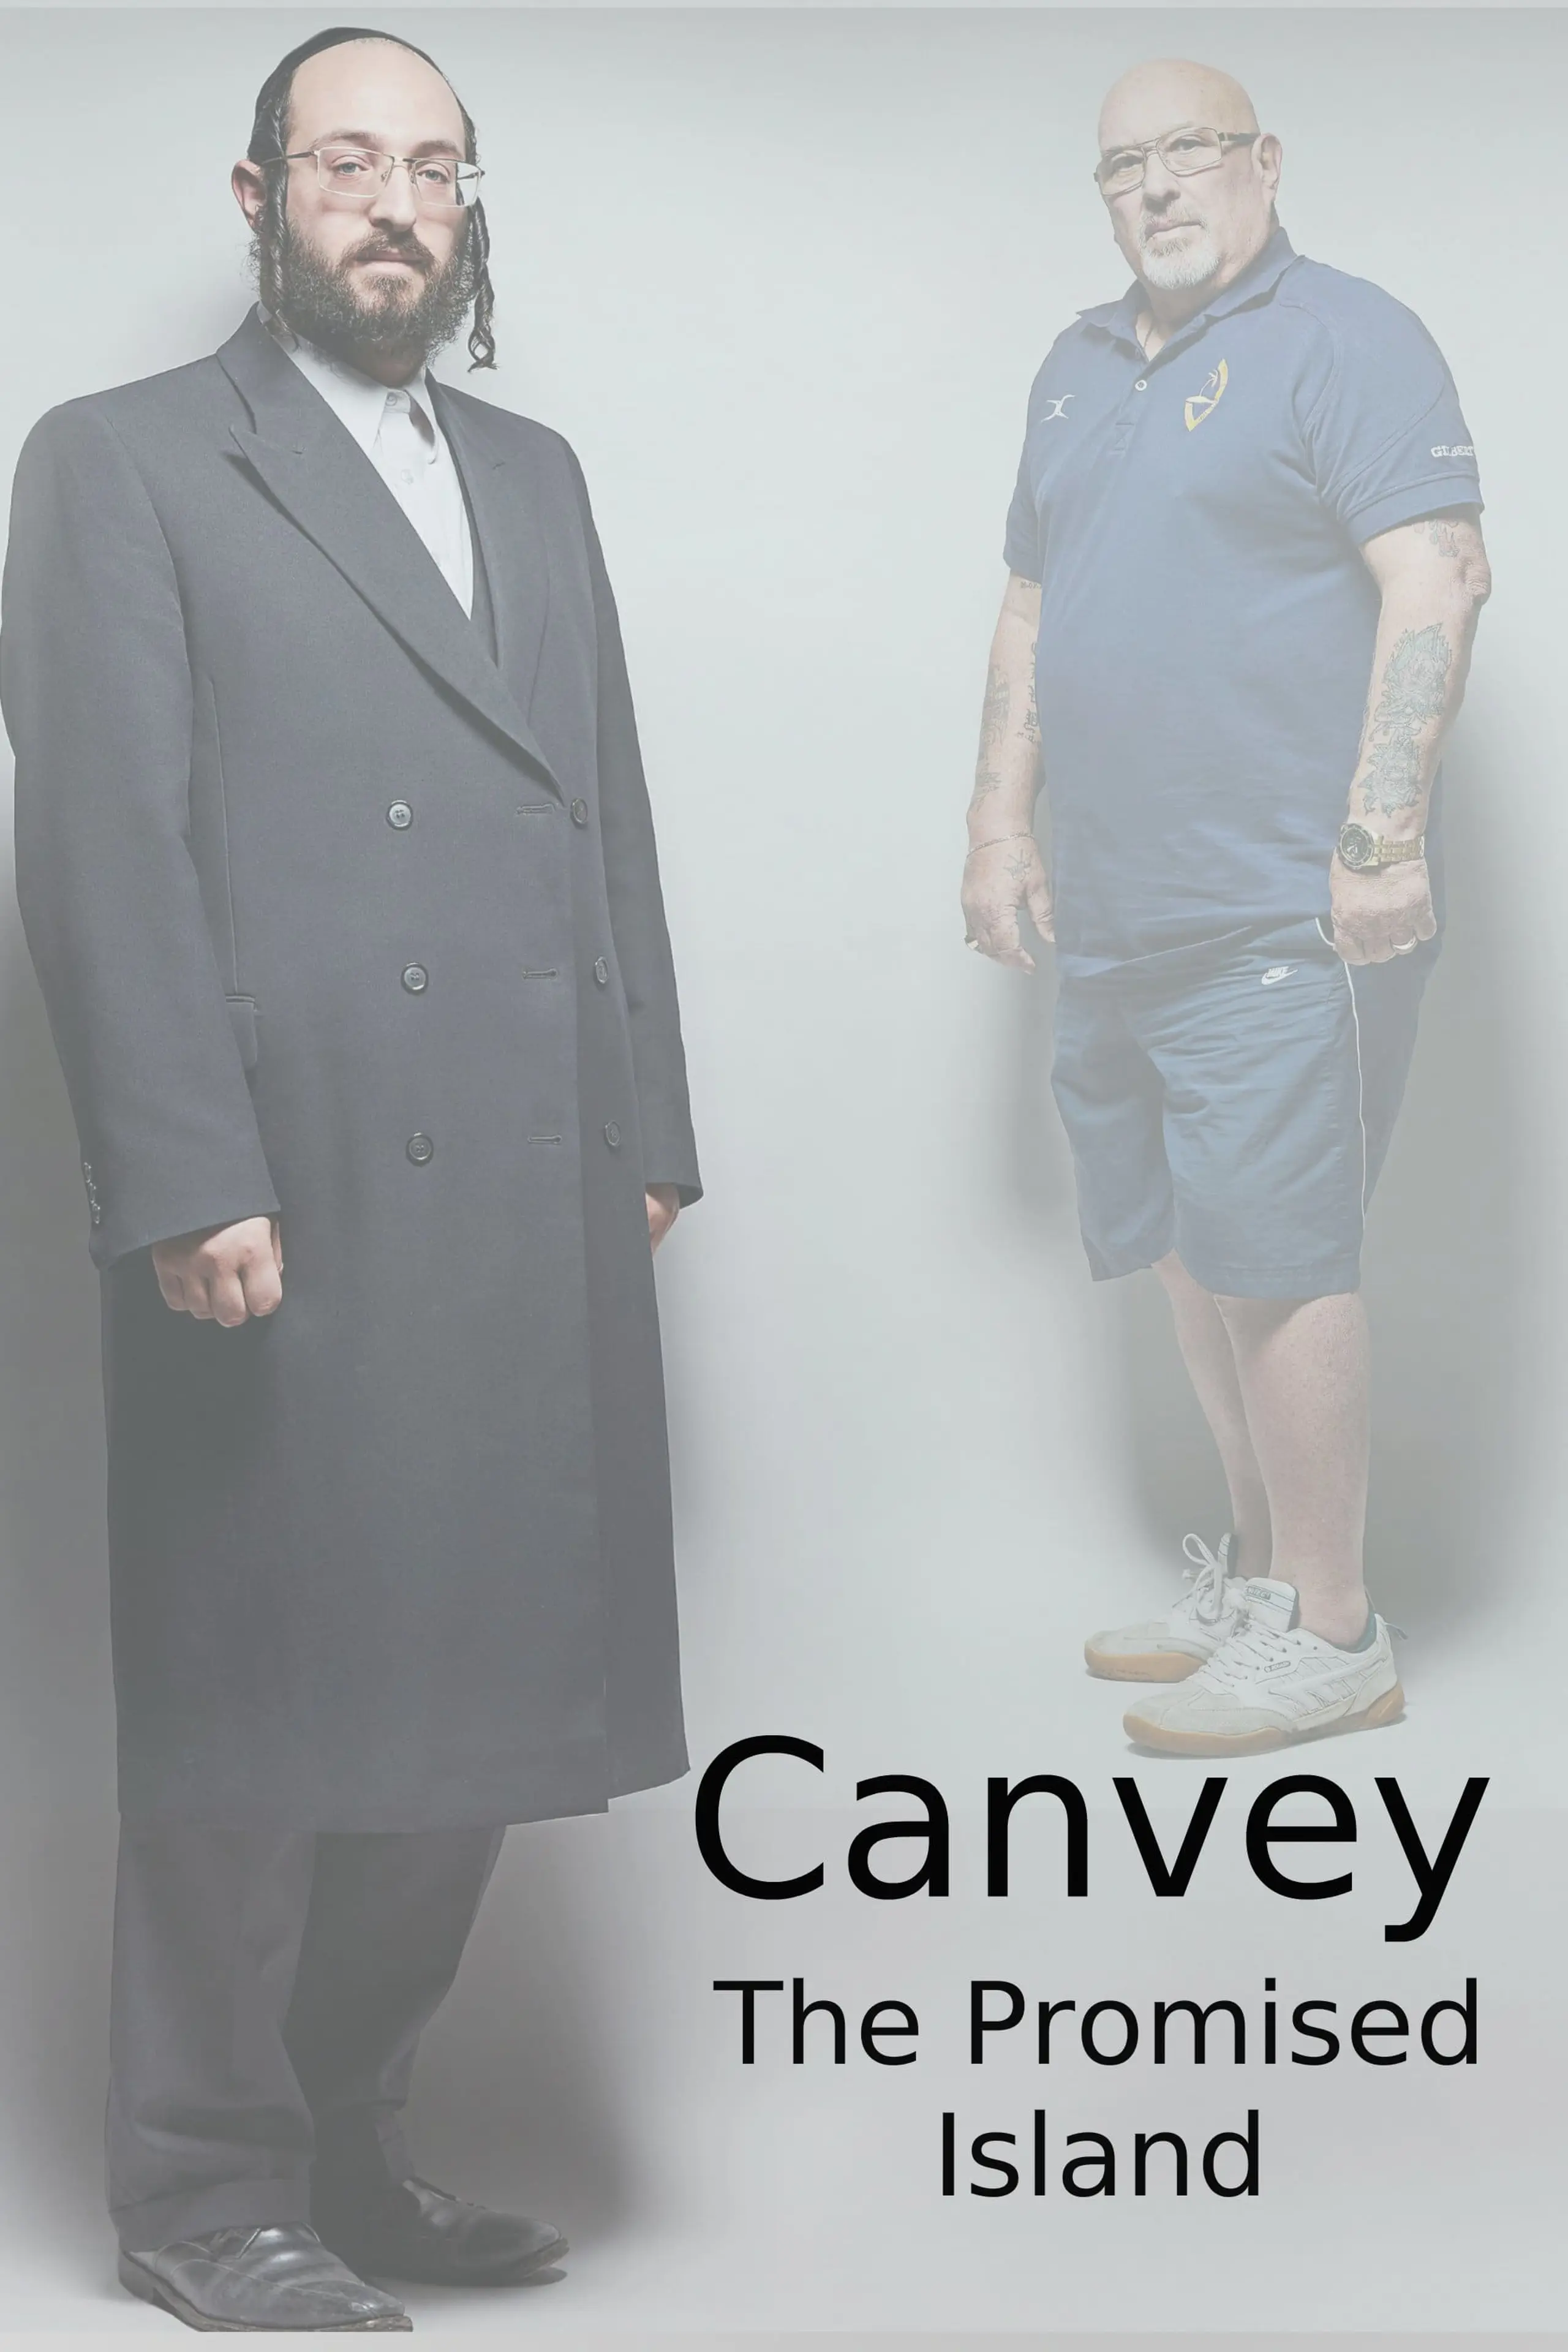 Canvey - The Promised Island